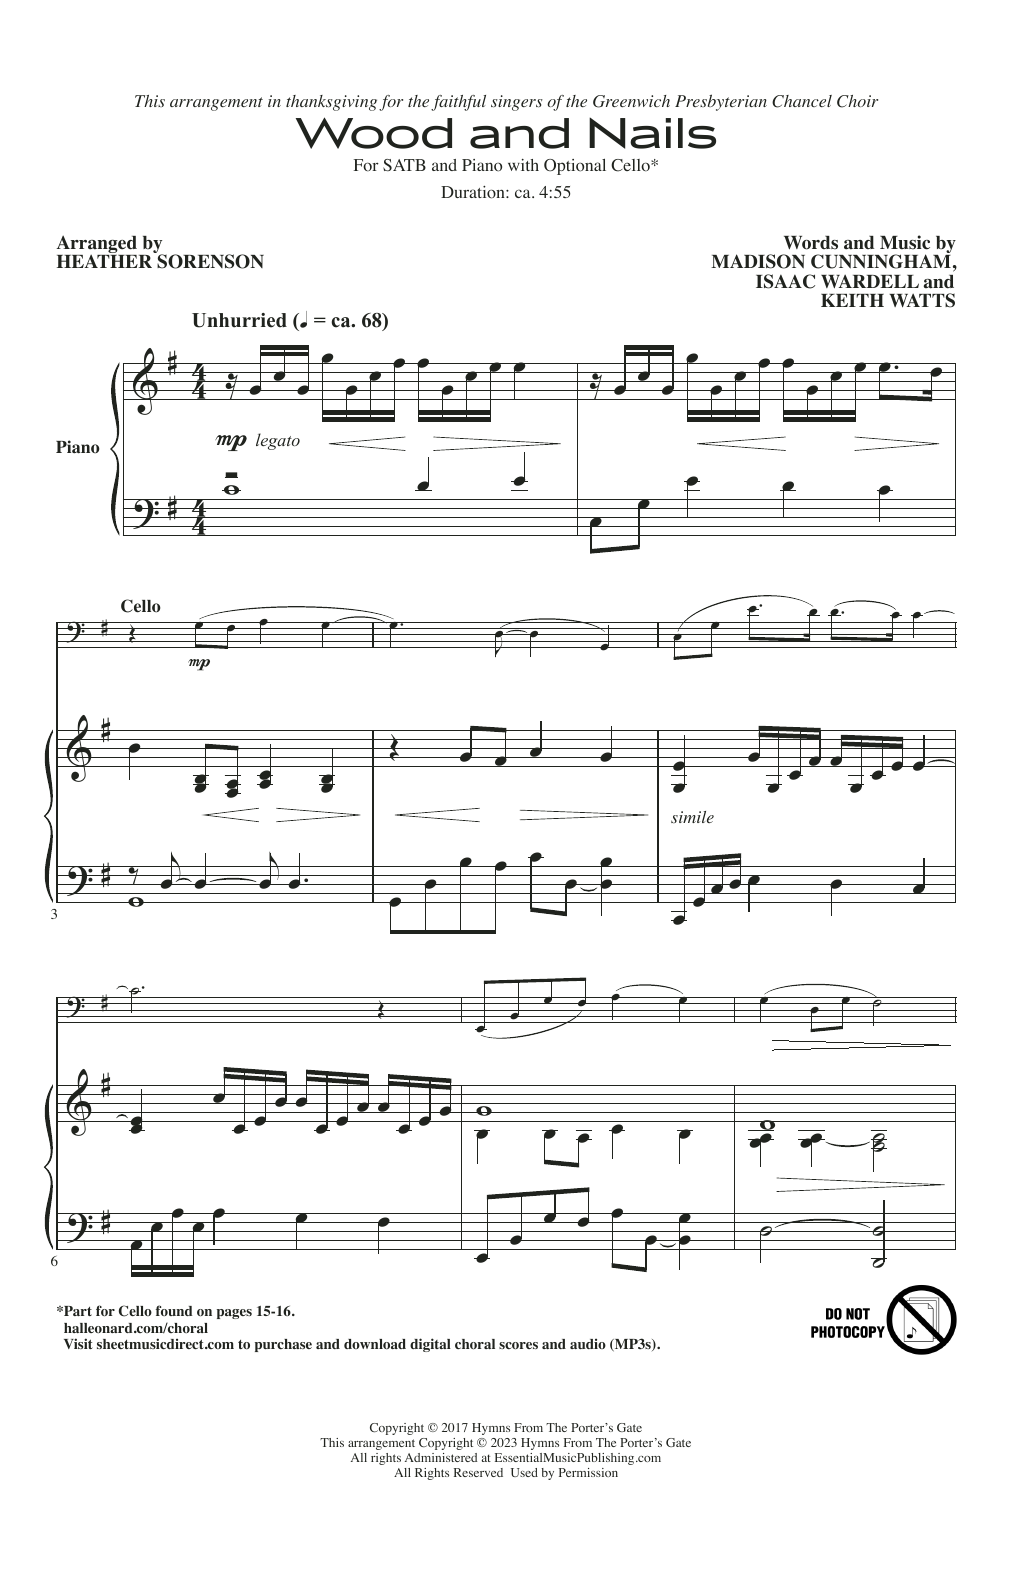 Download The Porter's Gate Wood And Nails (arr. Heather Sorenson) Sheet Music